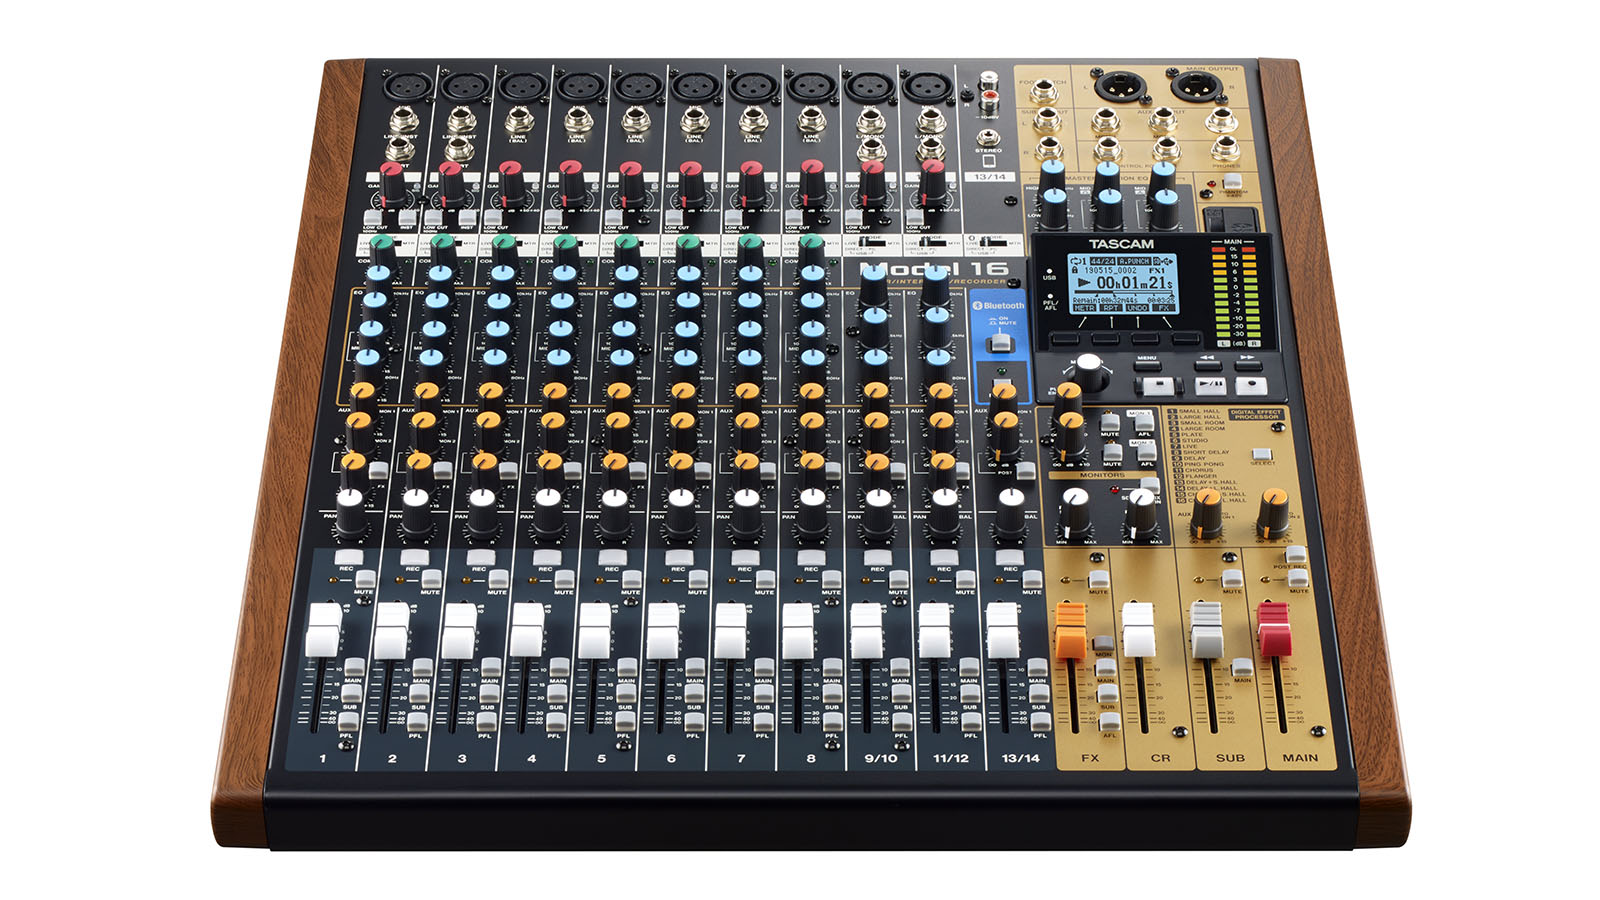 Model 16 has the feel of an analogue mixer but with the recording quality of a modern digital record